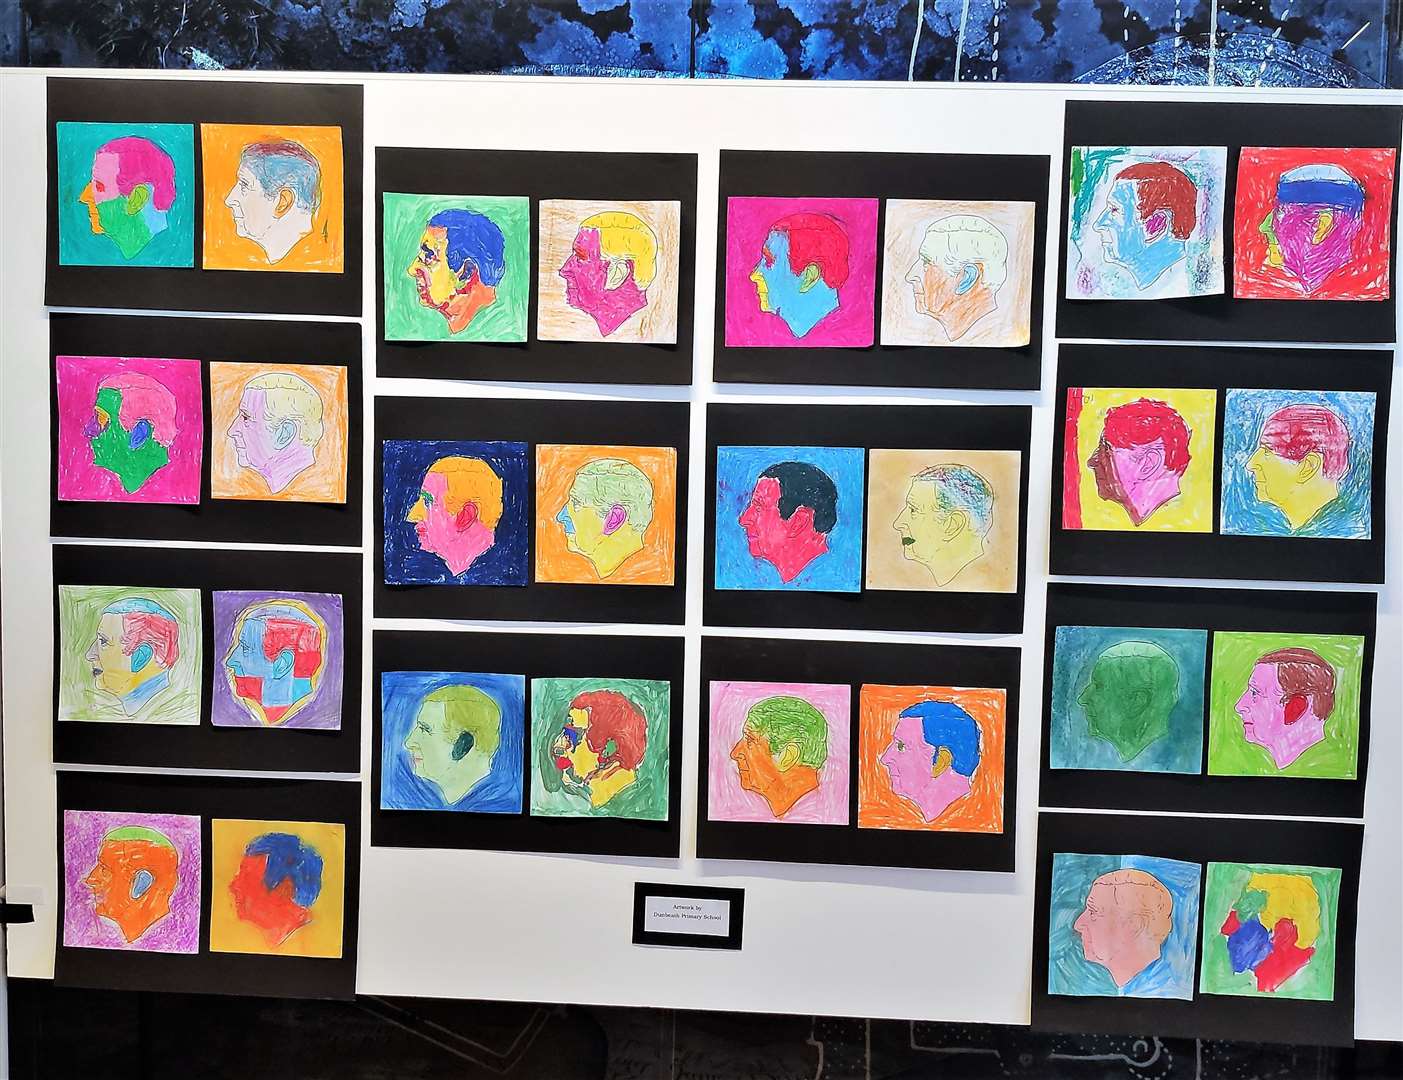 Andy Warhol inspired heads created by the children.